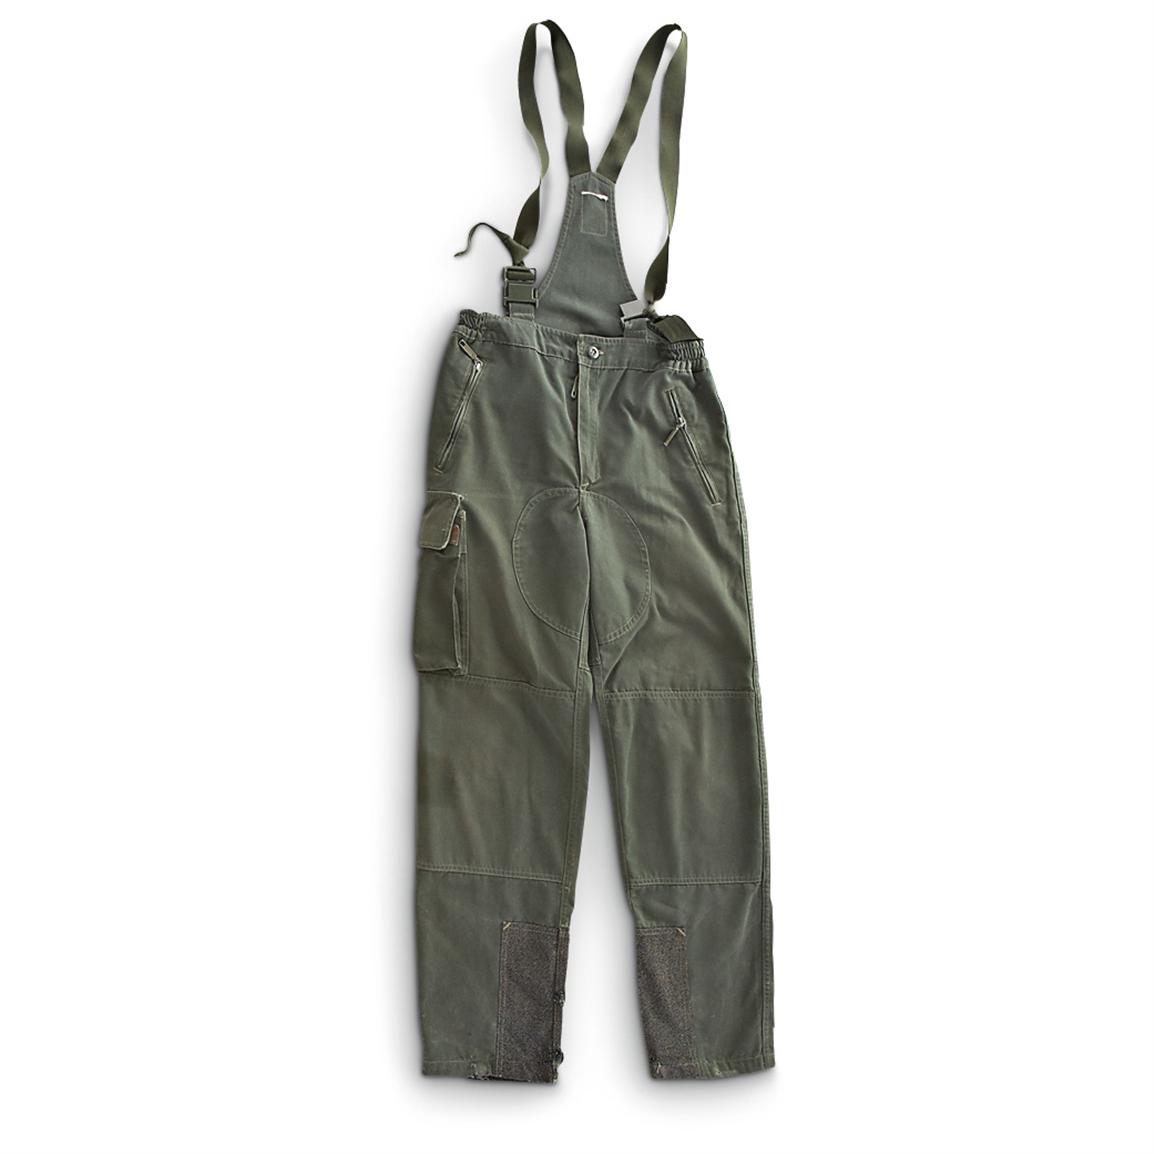 Used French Military Pants with Suspenders, Olive Drab - 216772, Pants ...